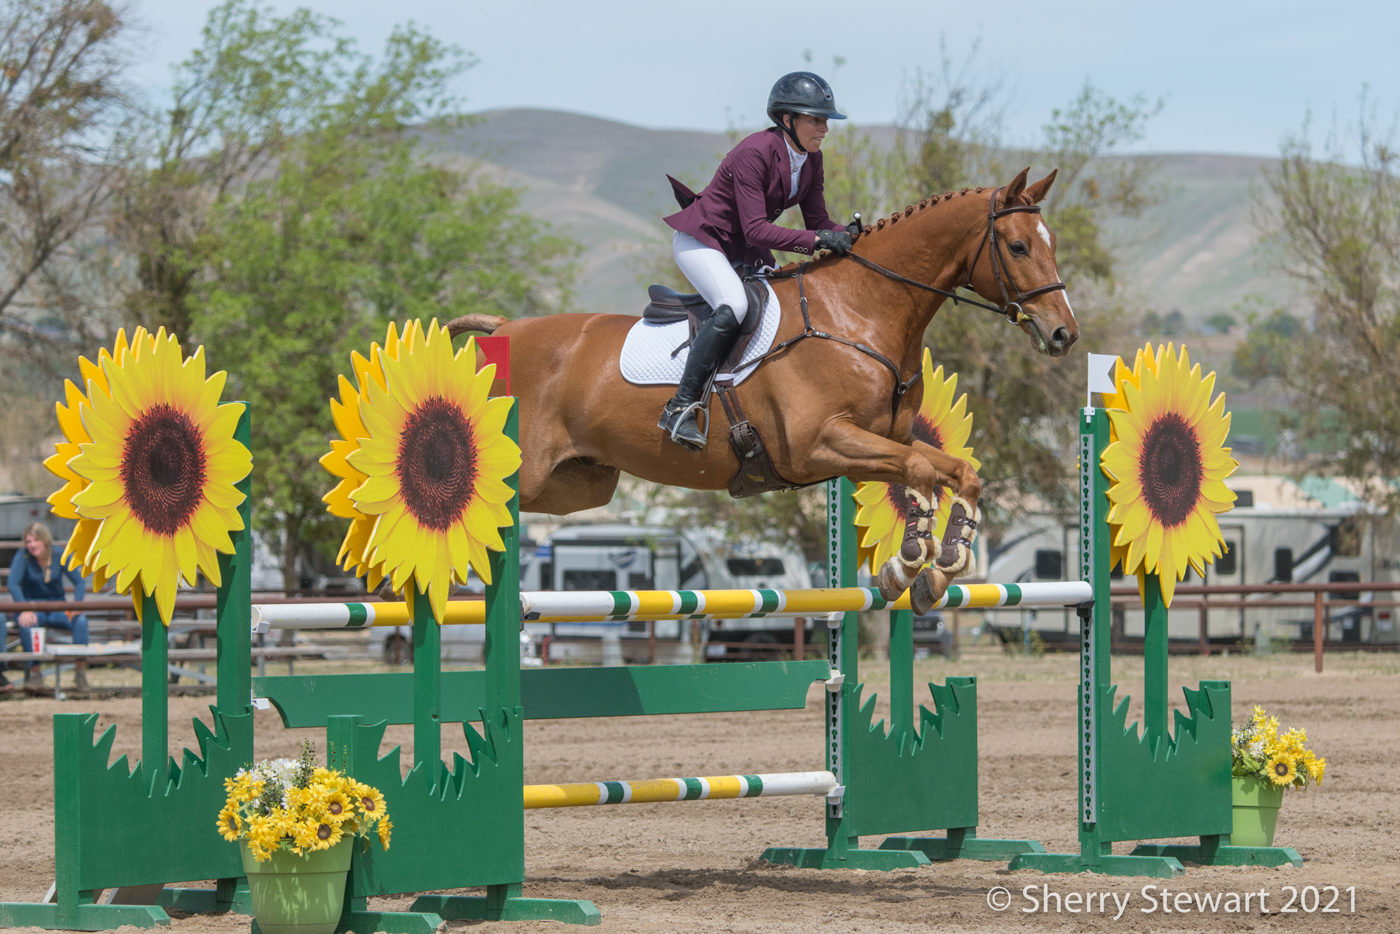 CCI2*-L - 3rd - Marissa Nielsen and Global Absolute. Sherry Stewart Photo.